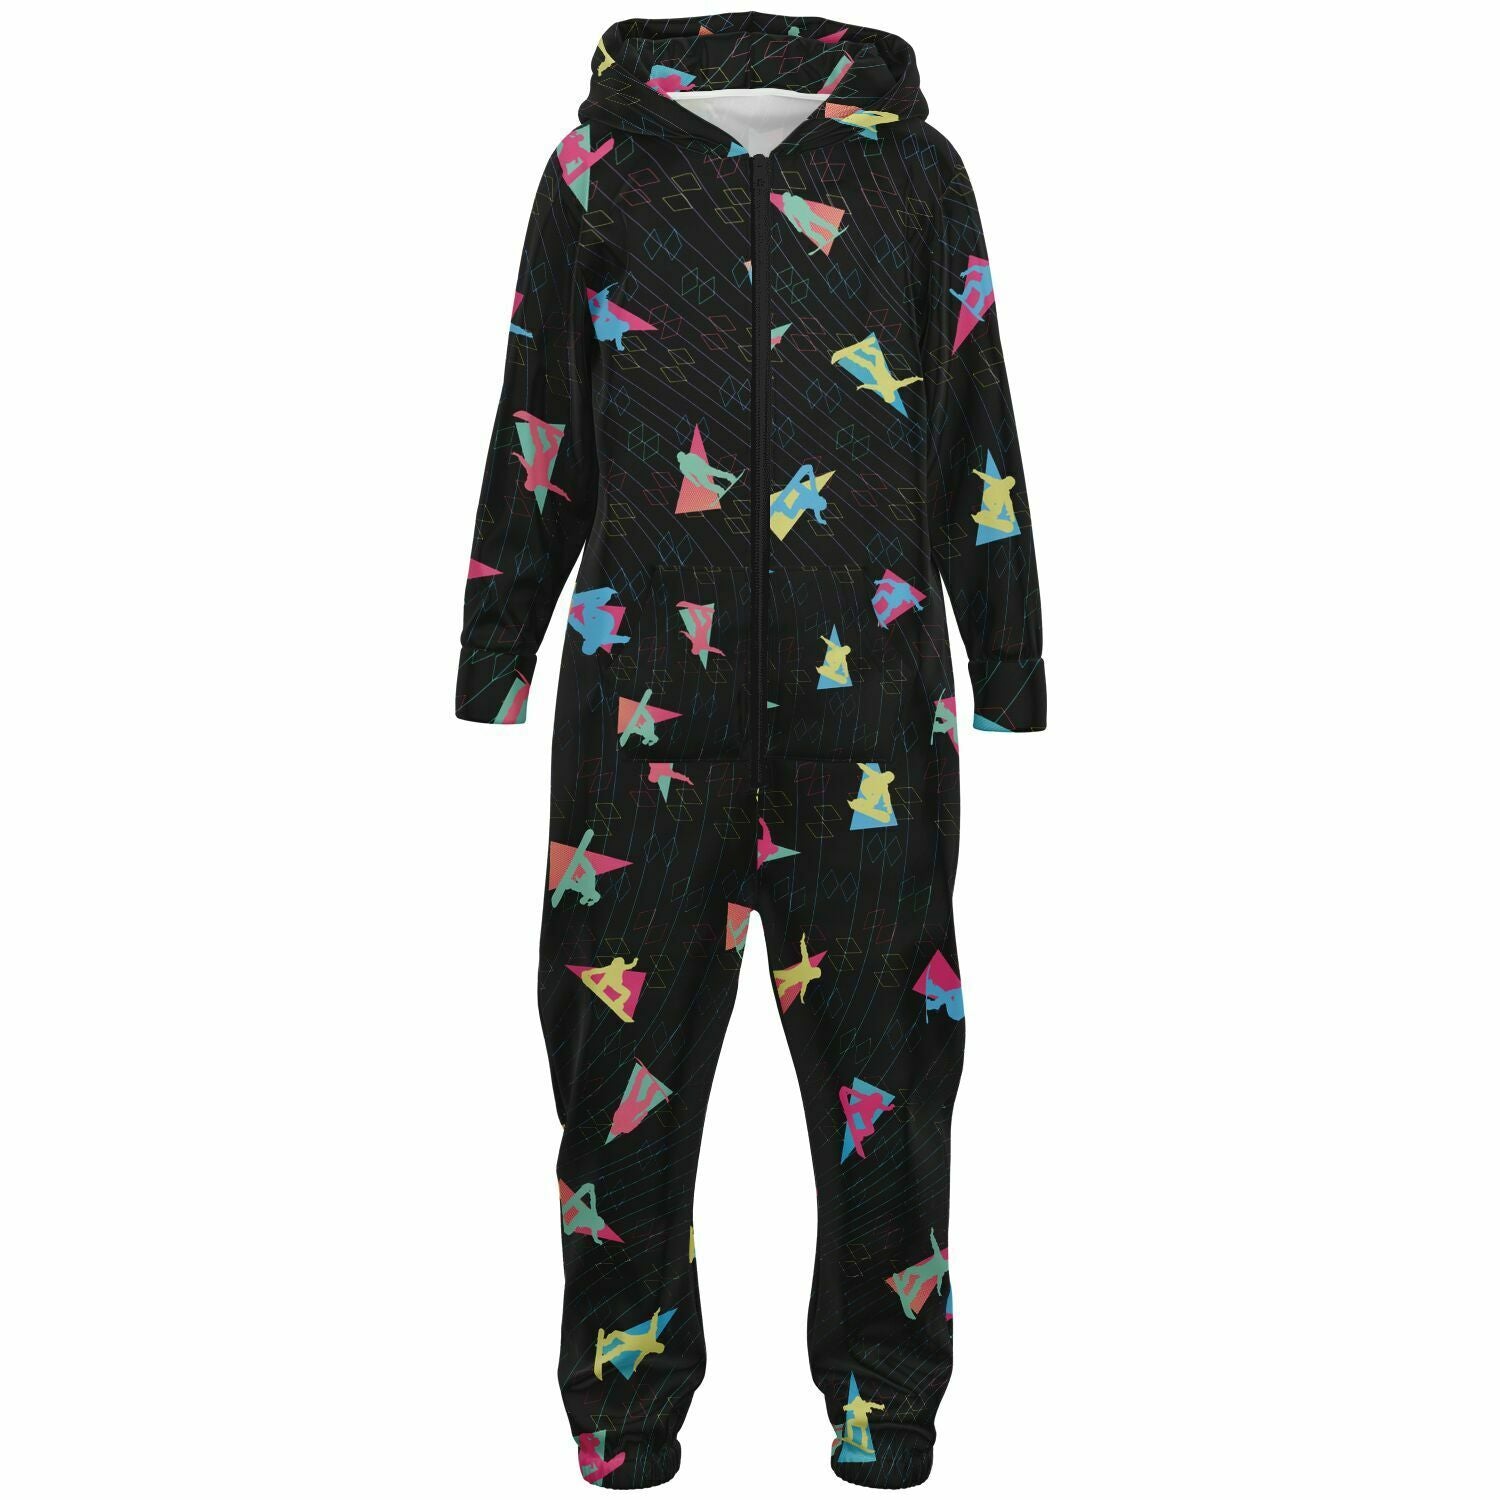 Snowboard Party Youth Unisex Jumpsuit